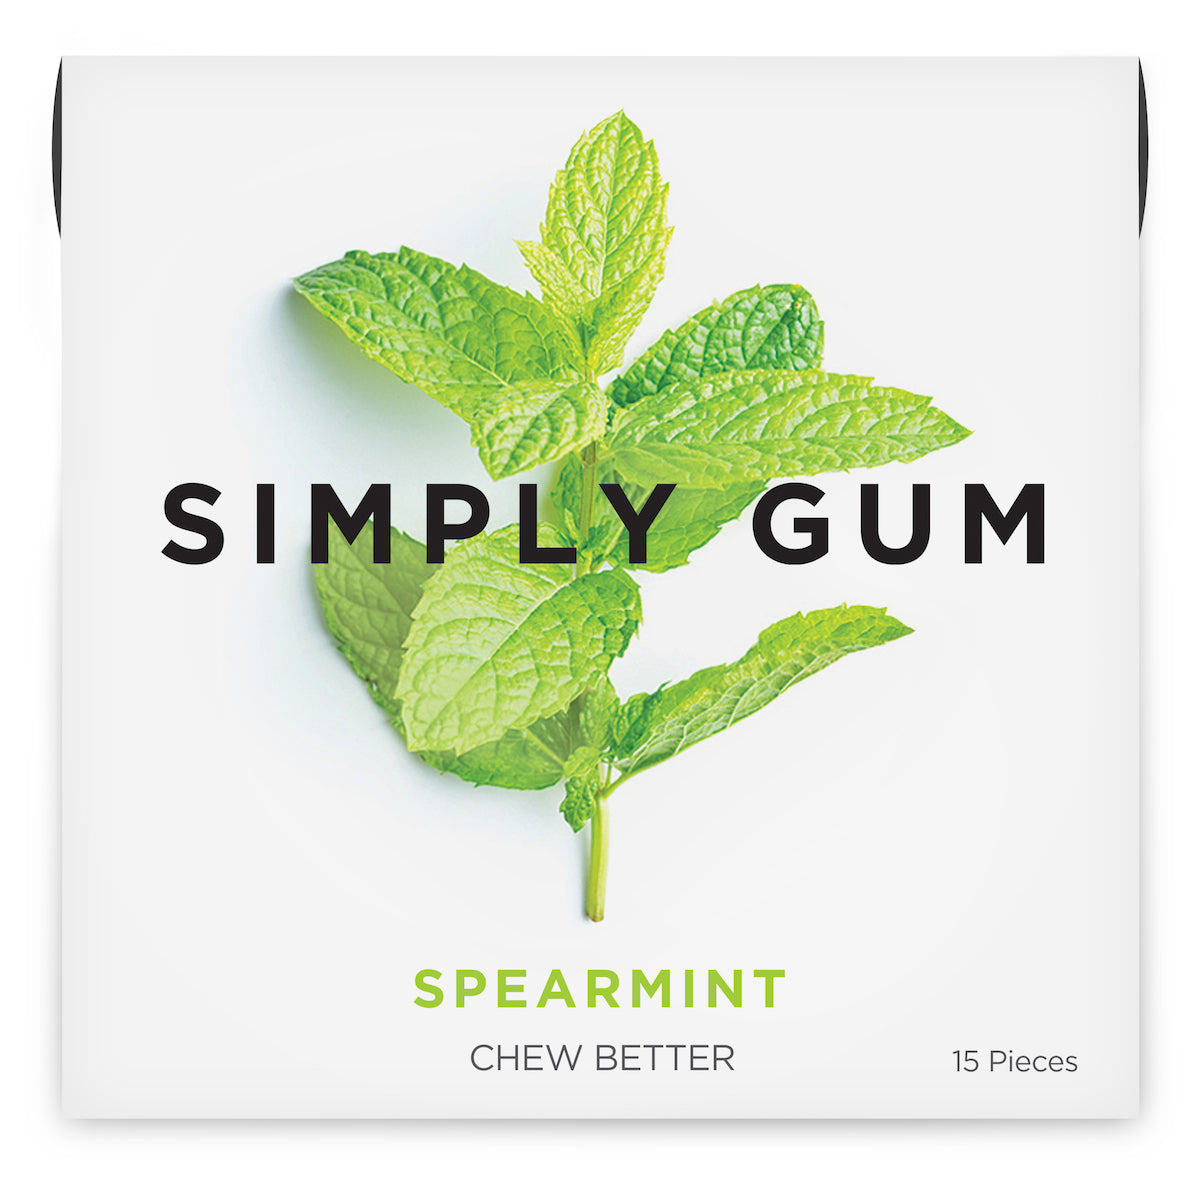 Fast home delivery of Hollywood Chewing Gum Spearmint Mint